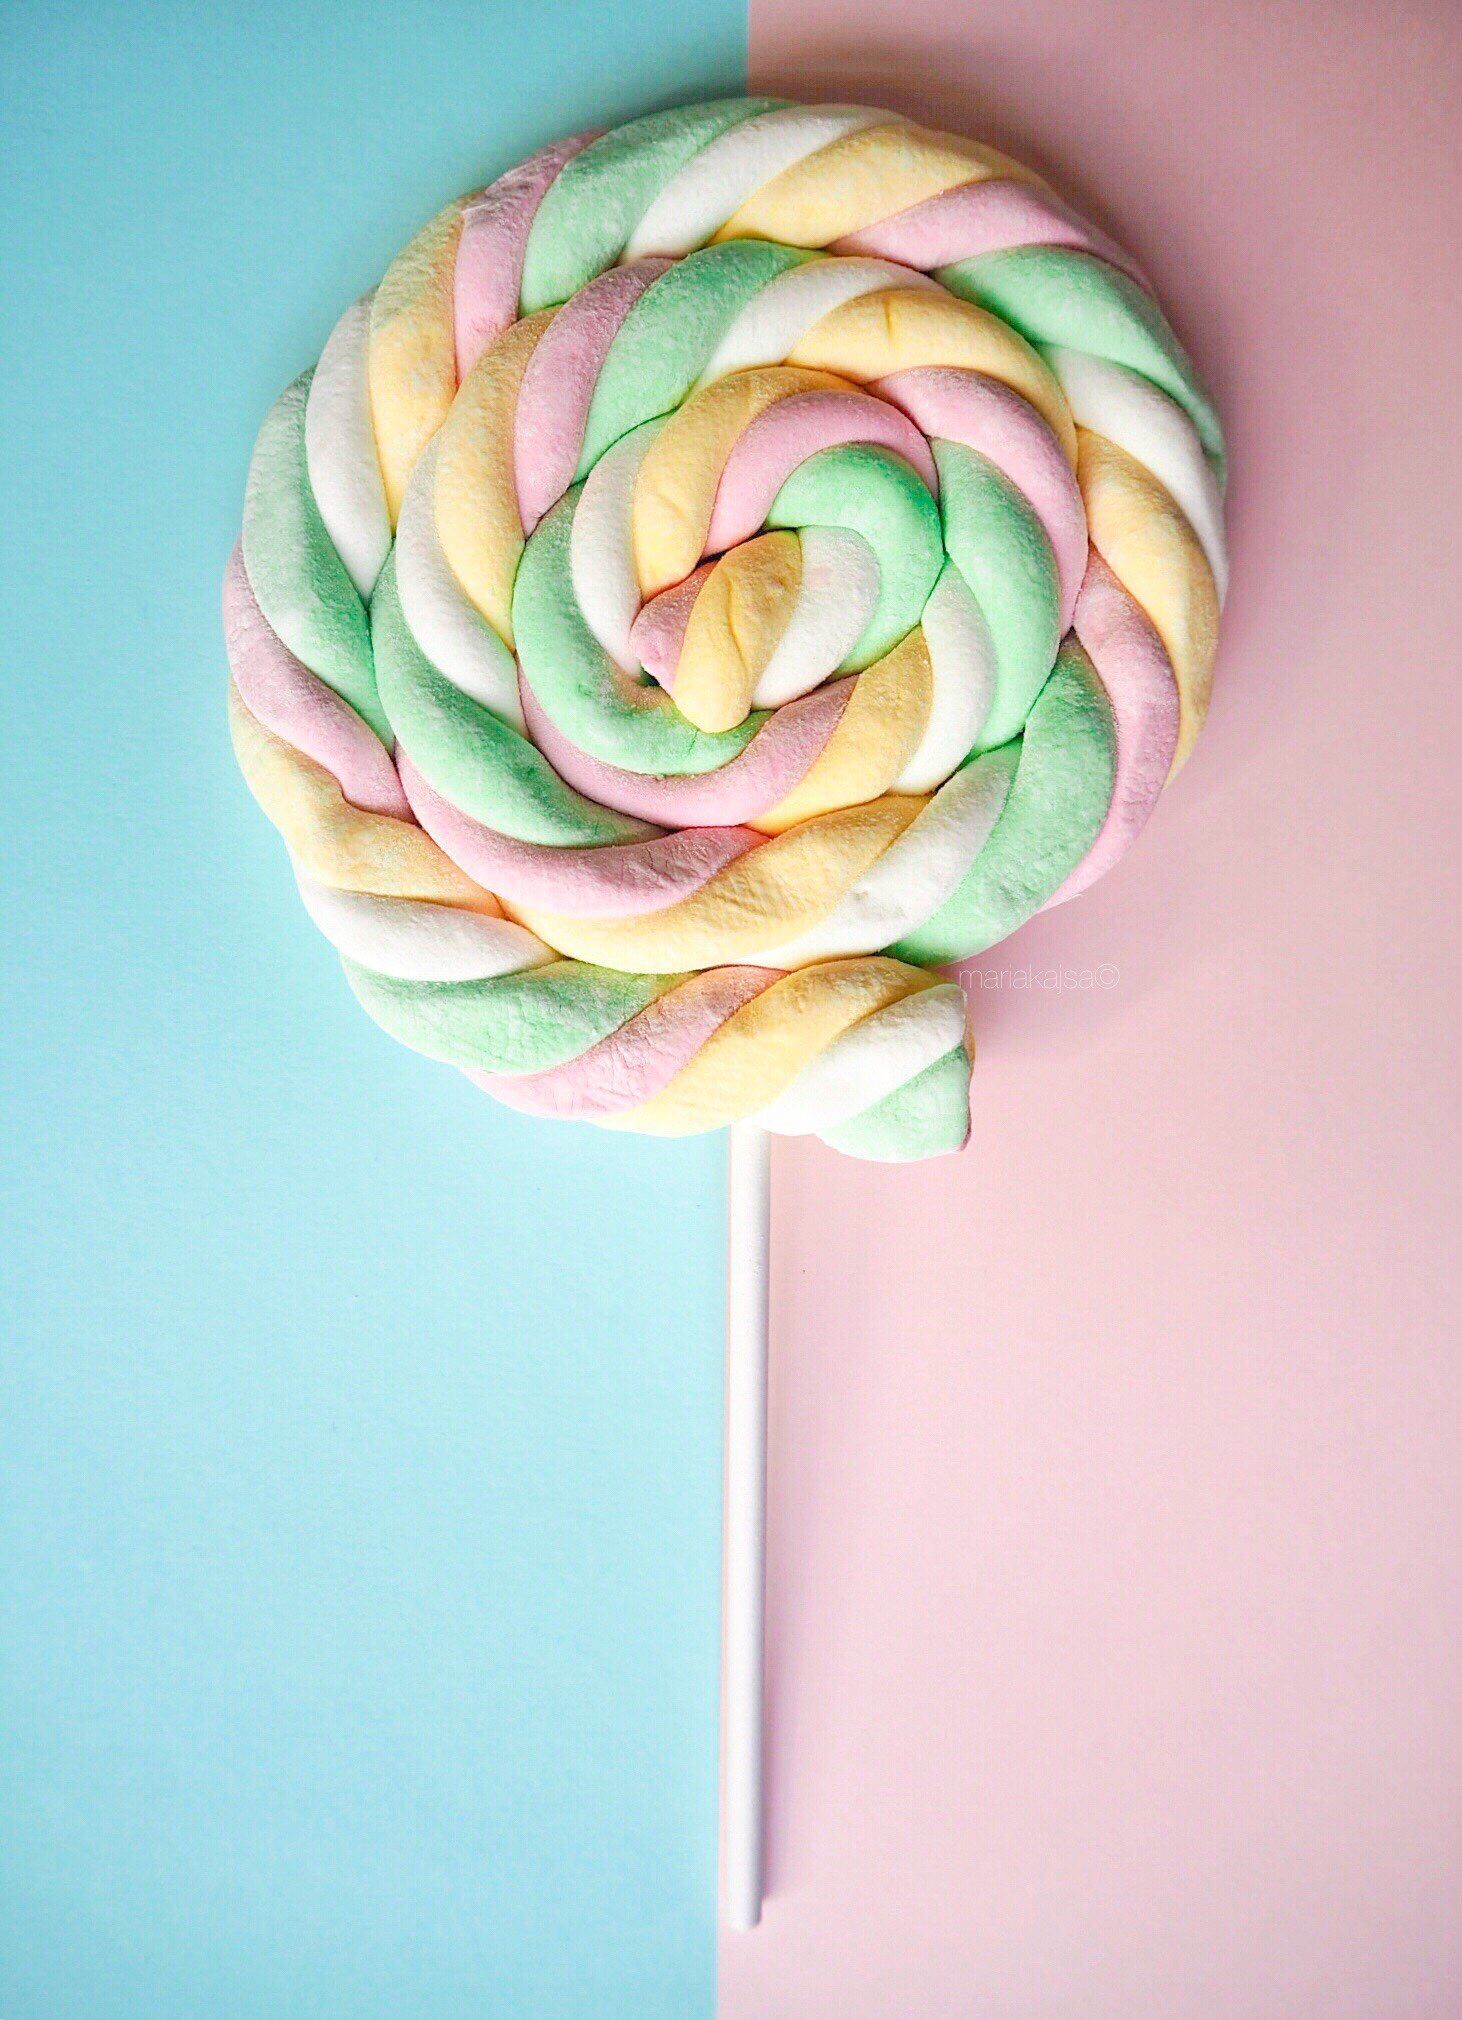 1462x2020 iPhone and Android Wallpapers: Pastel Candy Lollipop Wallpaper for iPhone  and Android- @beingmariakajsa on Instagram